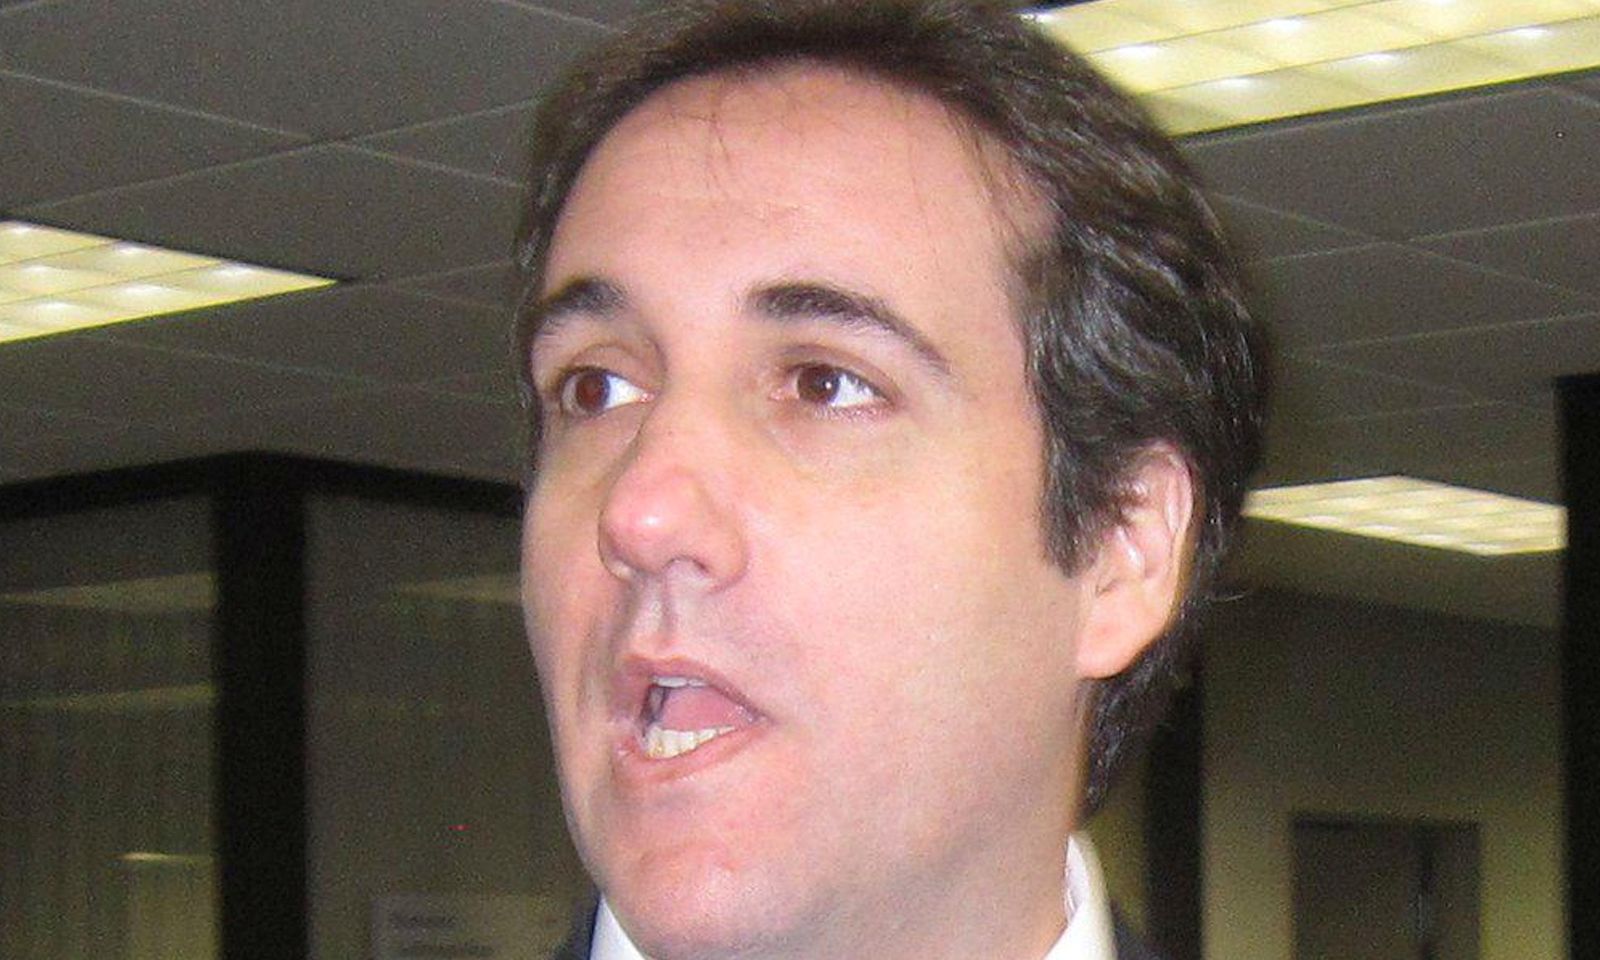 Trump's Lawyer Expected to Seek Stay in Stormy Daniels Lawsuit